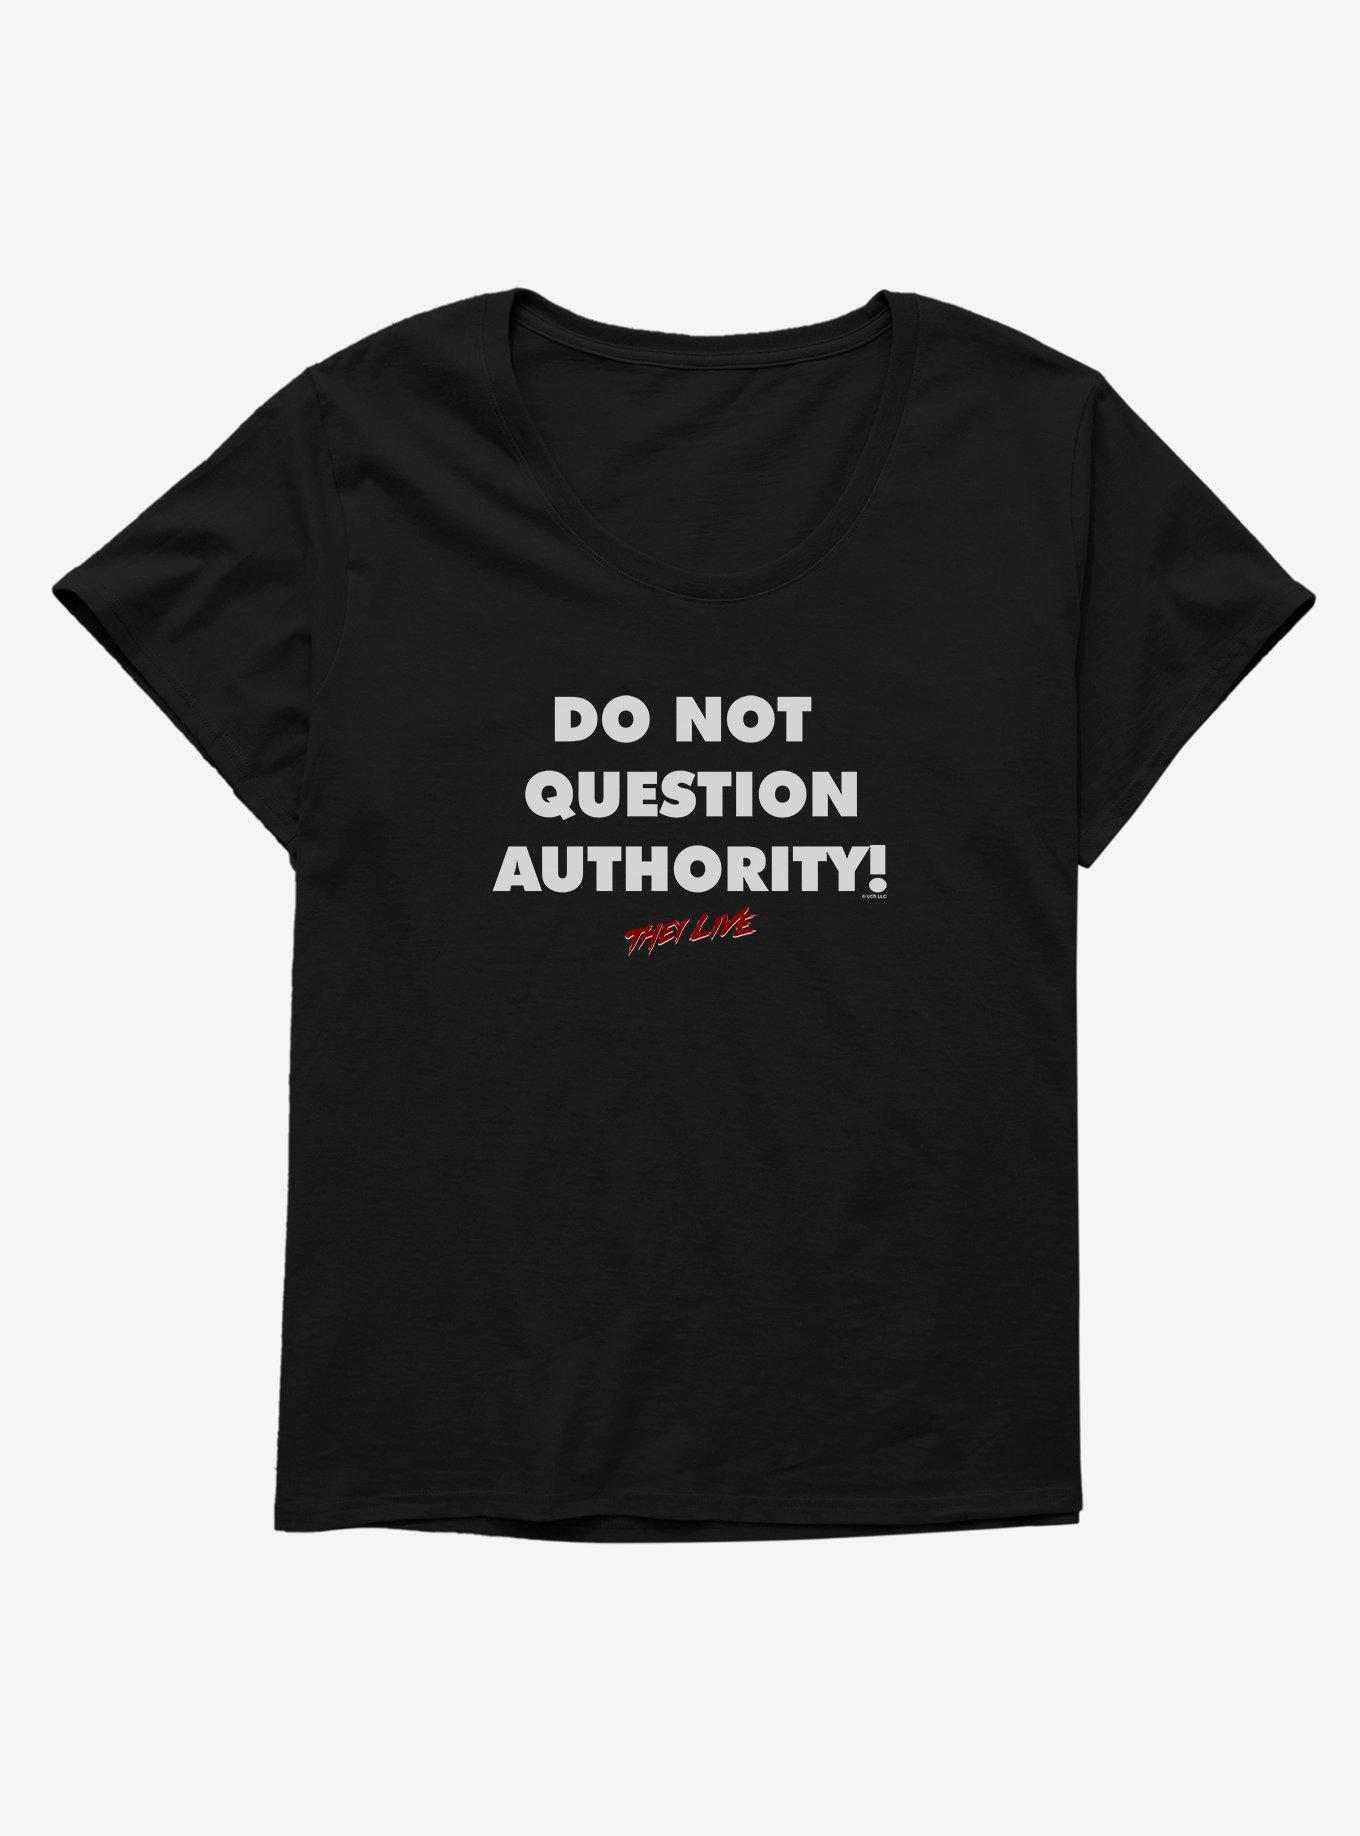 They Live Authority! Girls T-Shirt Plus